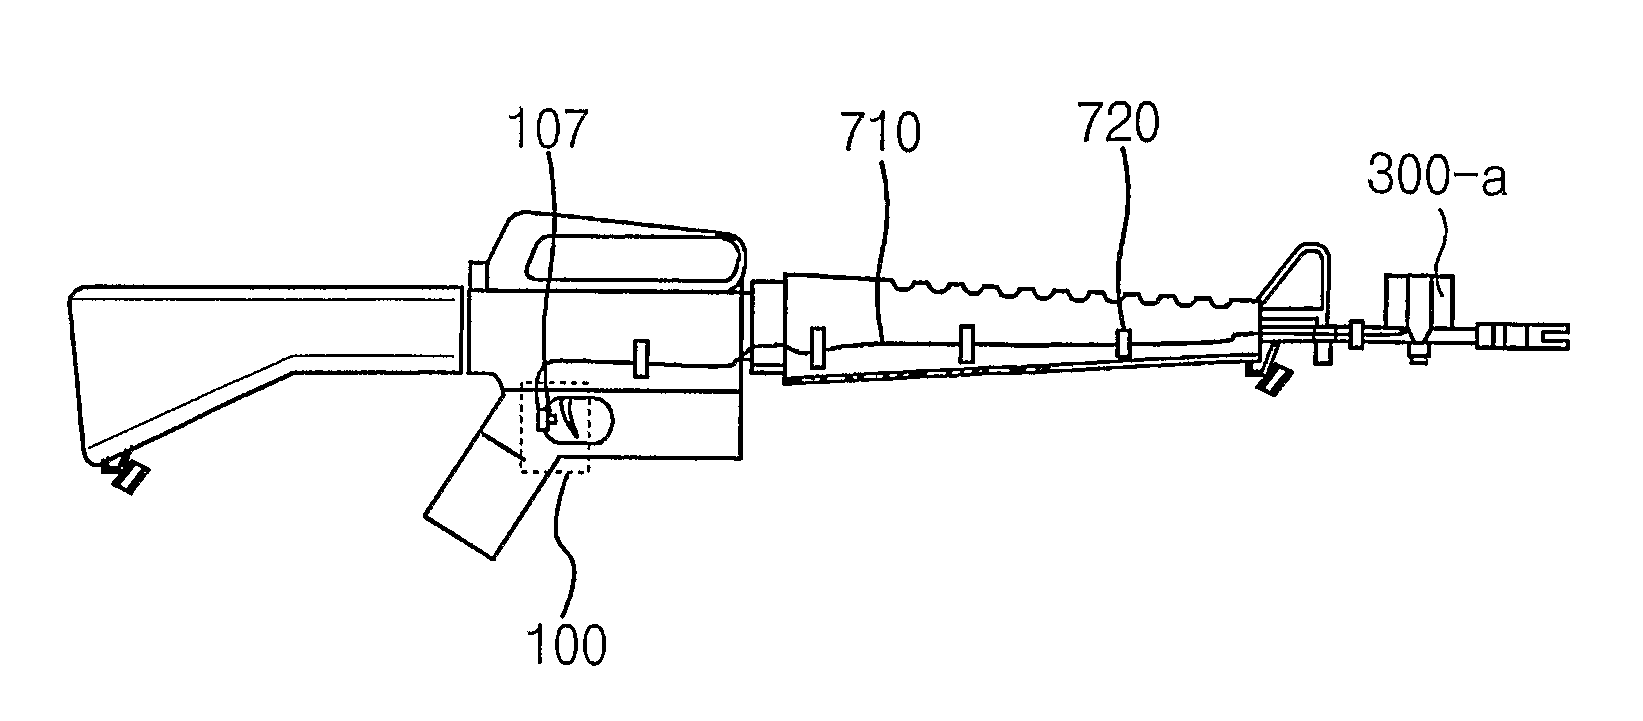 Structure of Detecting Device Used in Miles System and Gun Simulator